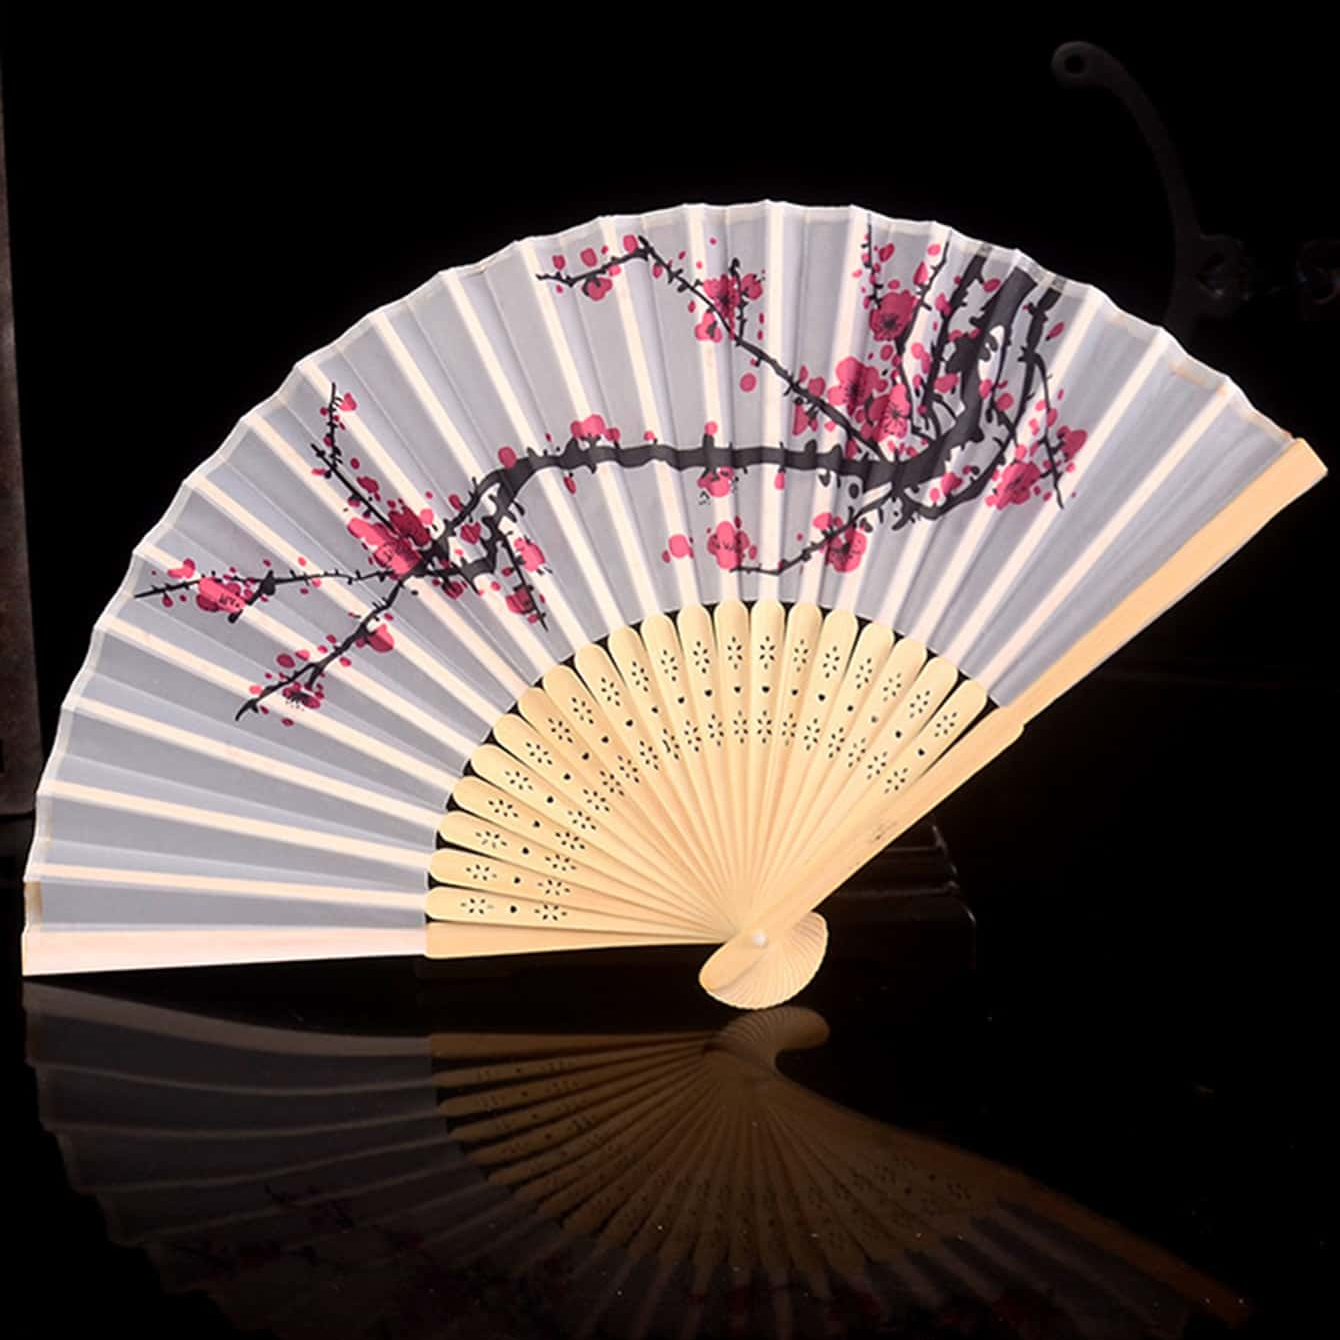 Fine Pretty Womens Dance Show Traditional Fans Handheld 7 Chinese Silk  Floral Decorations With Folding Design Perfect Crafts Gift With From  Zuotang, $3.25